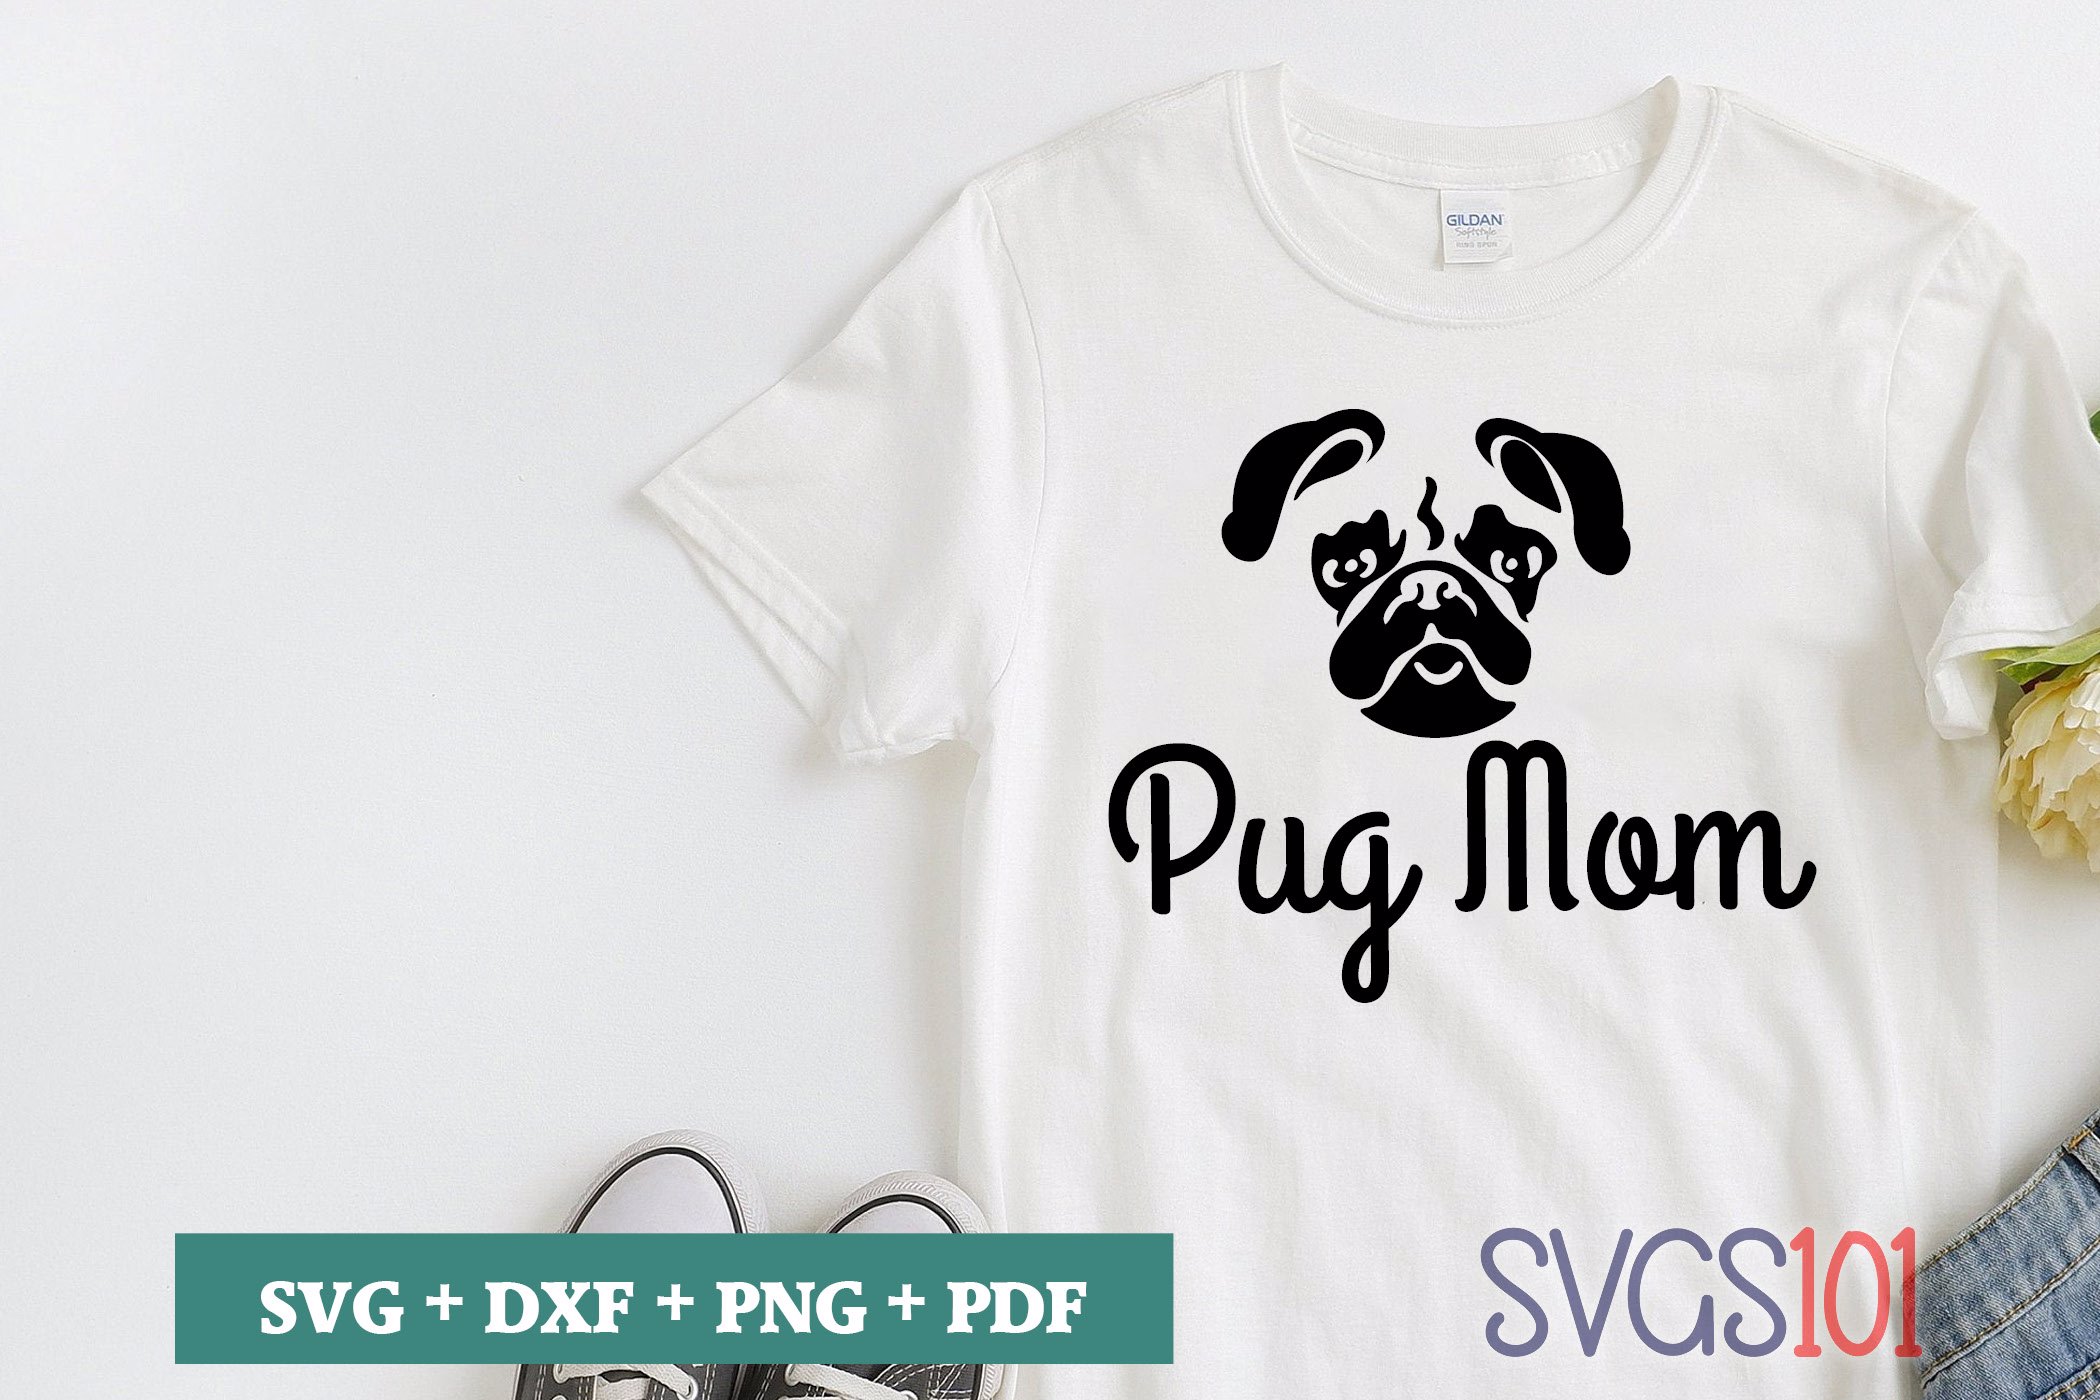 Pug Mom SVG Cuttable file - DXF, EPS, PNG, PDF | SVG Cutting File